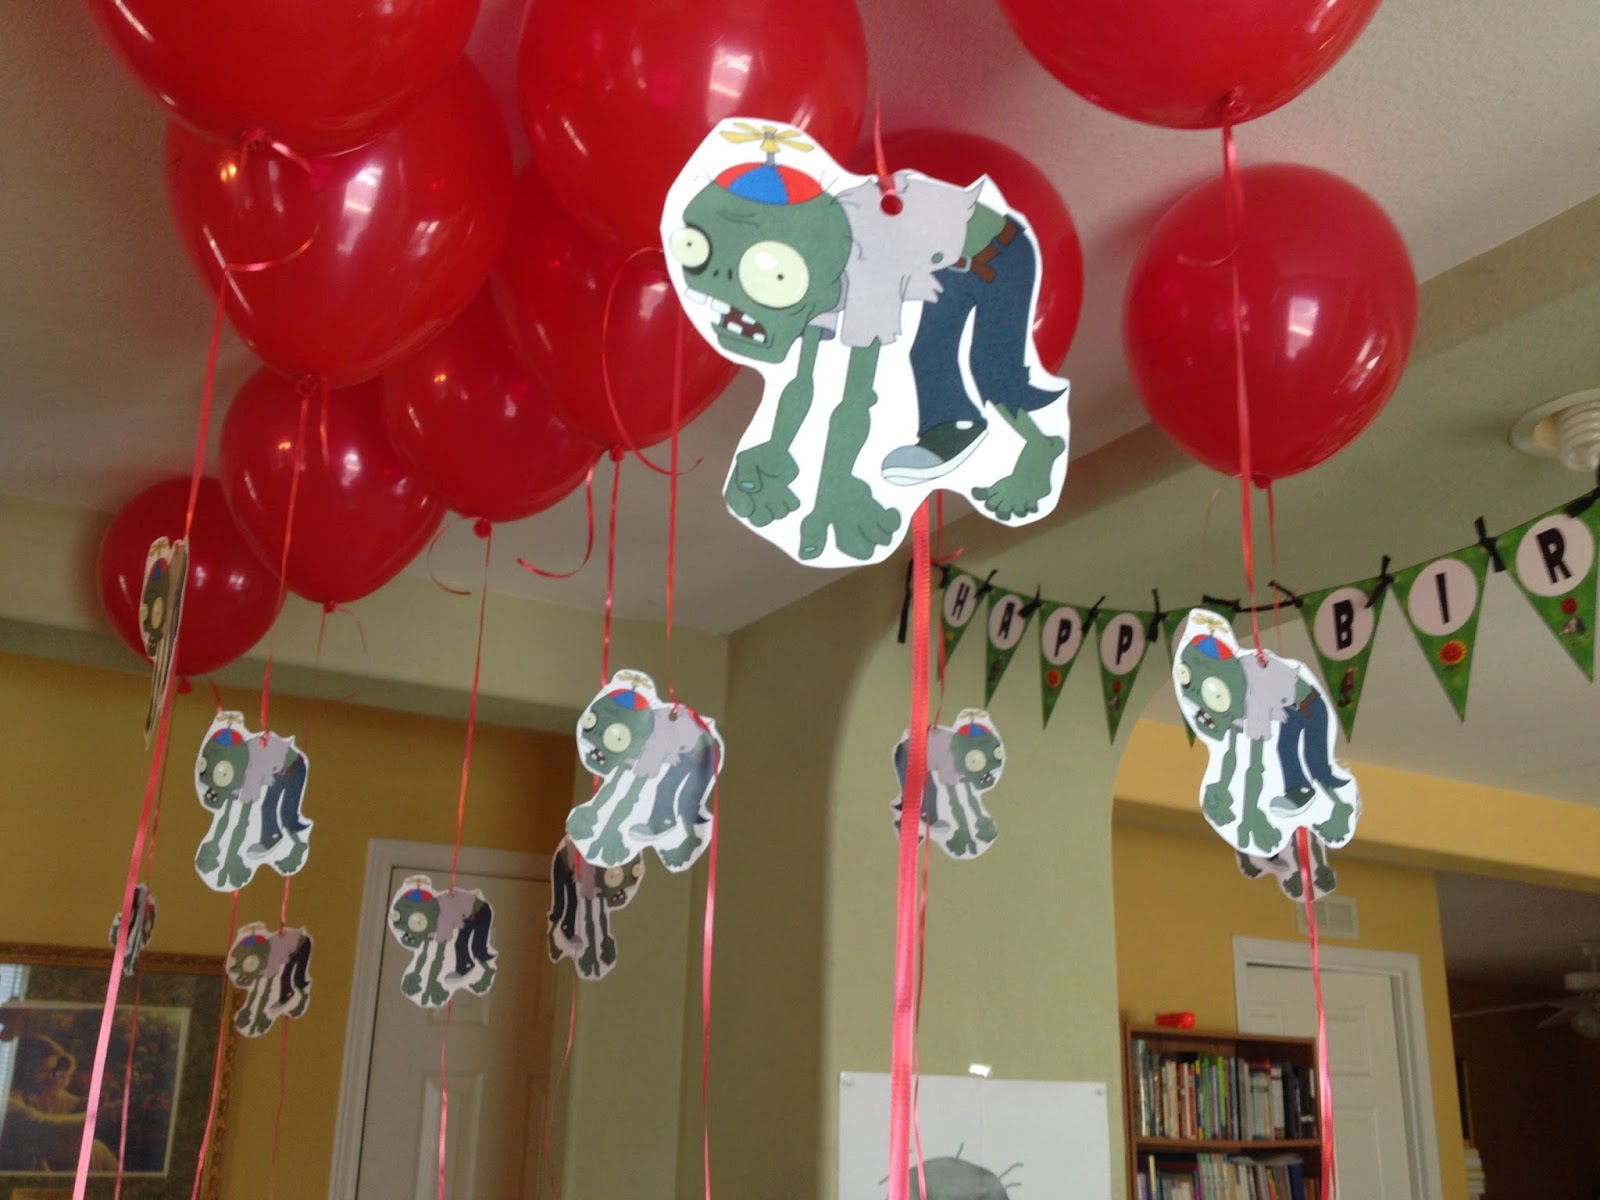 Plants  Plants vs zombies, Plant zombie, Plants vs zombies birthday party